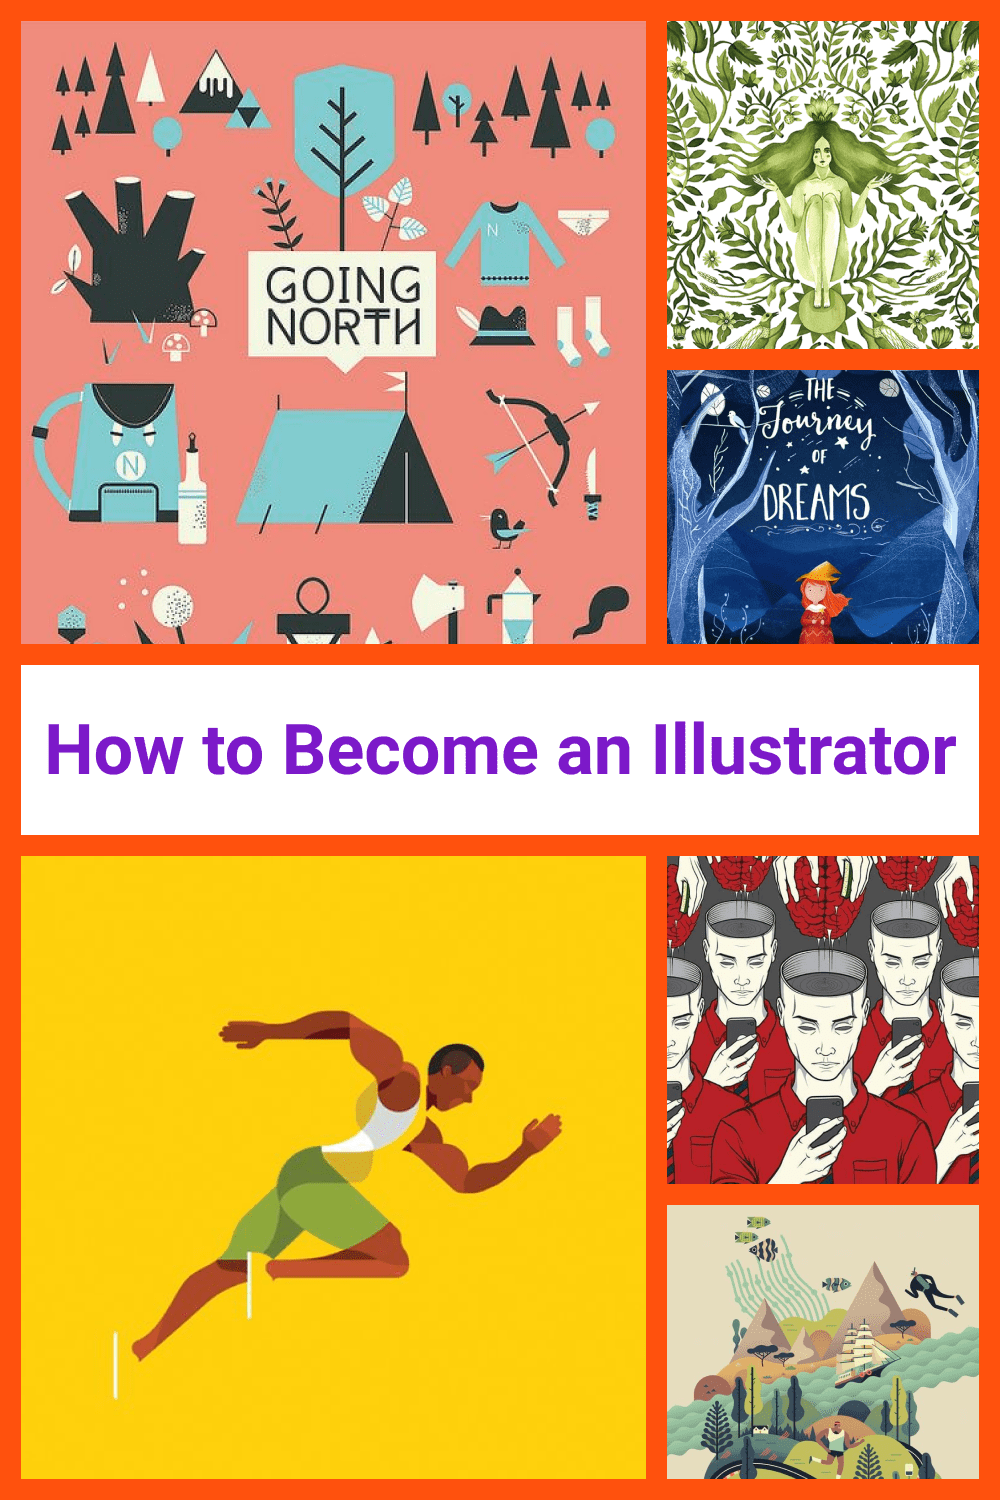 How to Become an Illustrator pinterest.